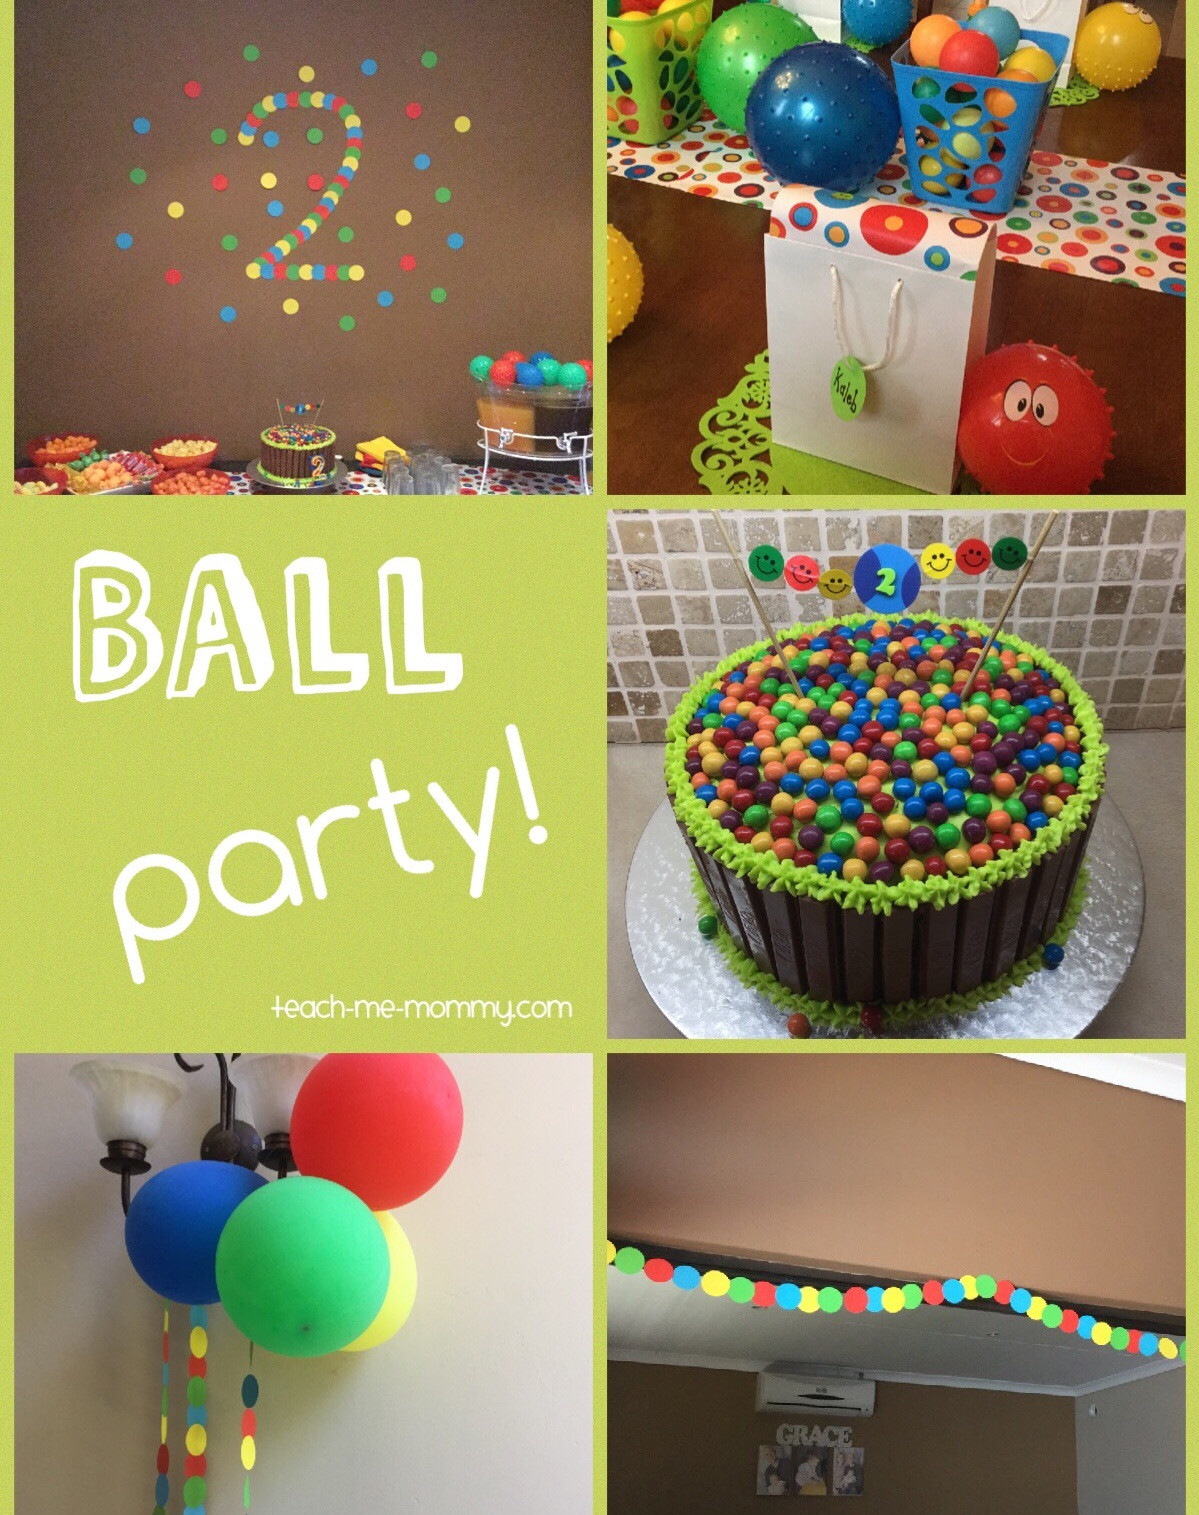 Birthday Party Ideas For 2 Year Old
 Ball Themed Party for a 2 Year Old Teach Me Mommy